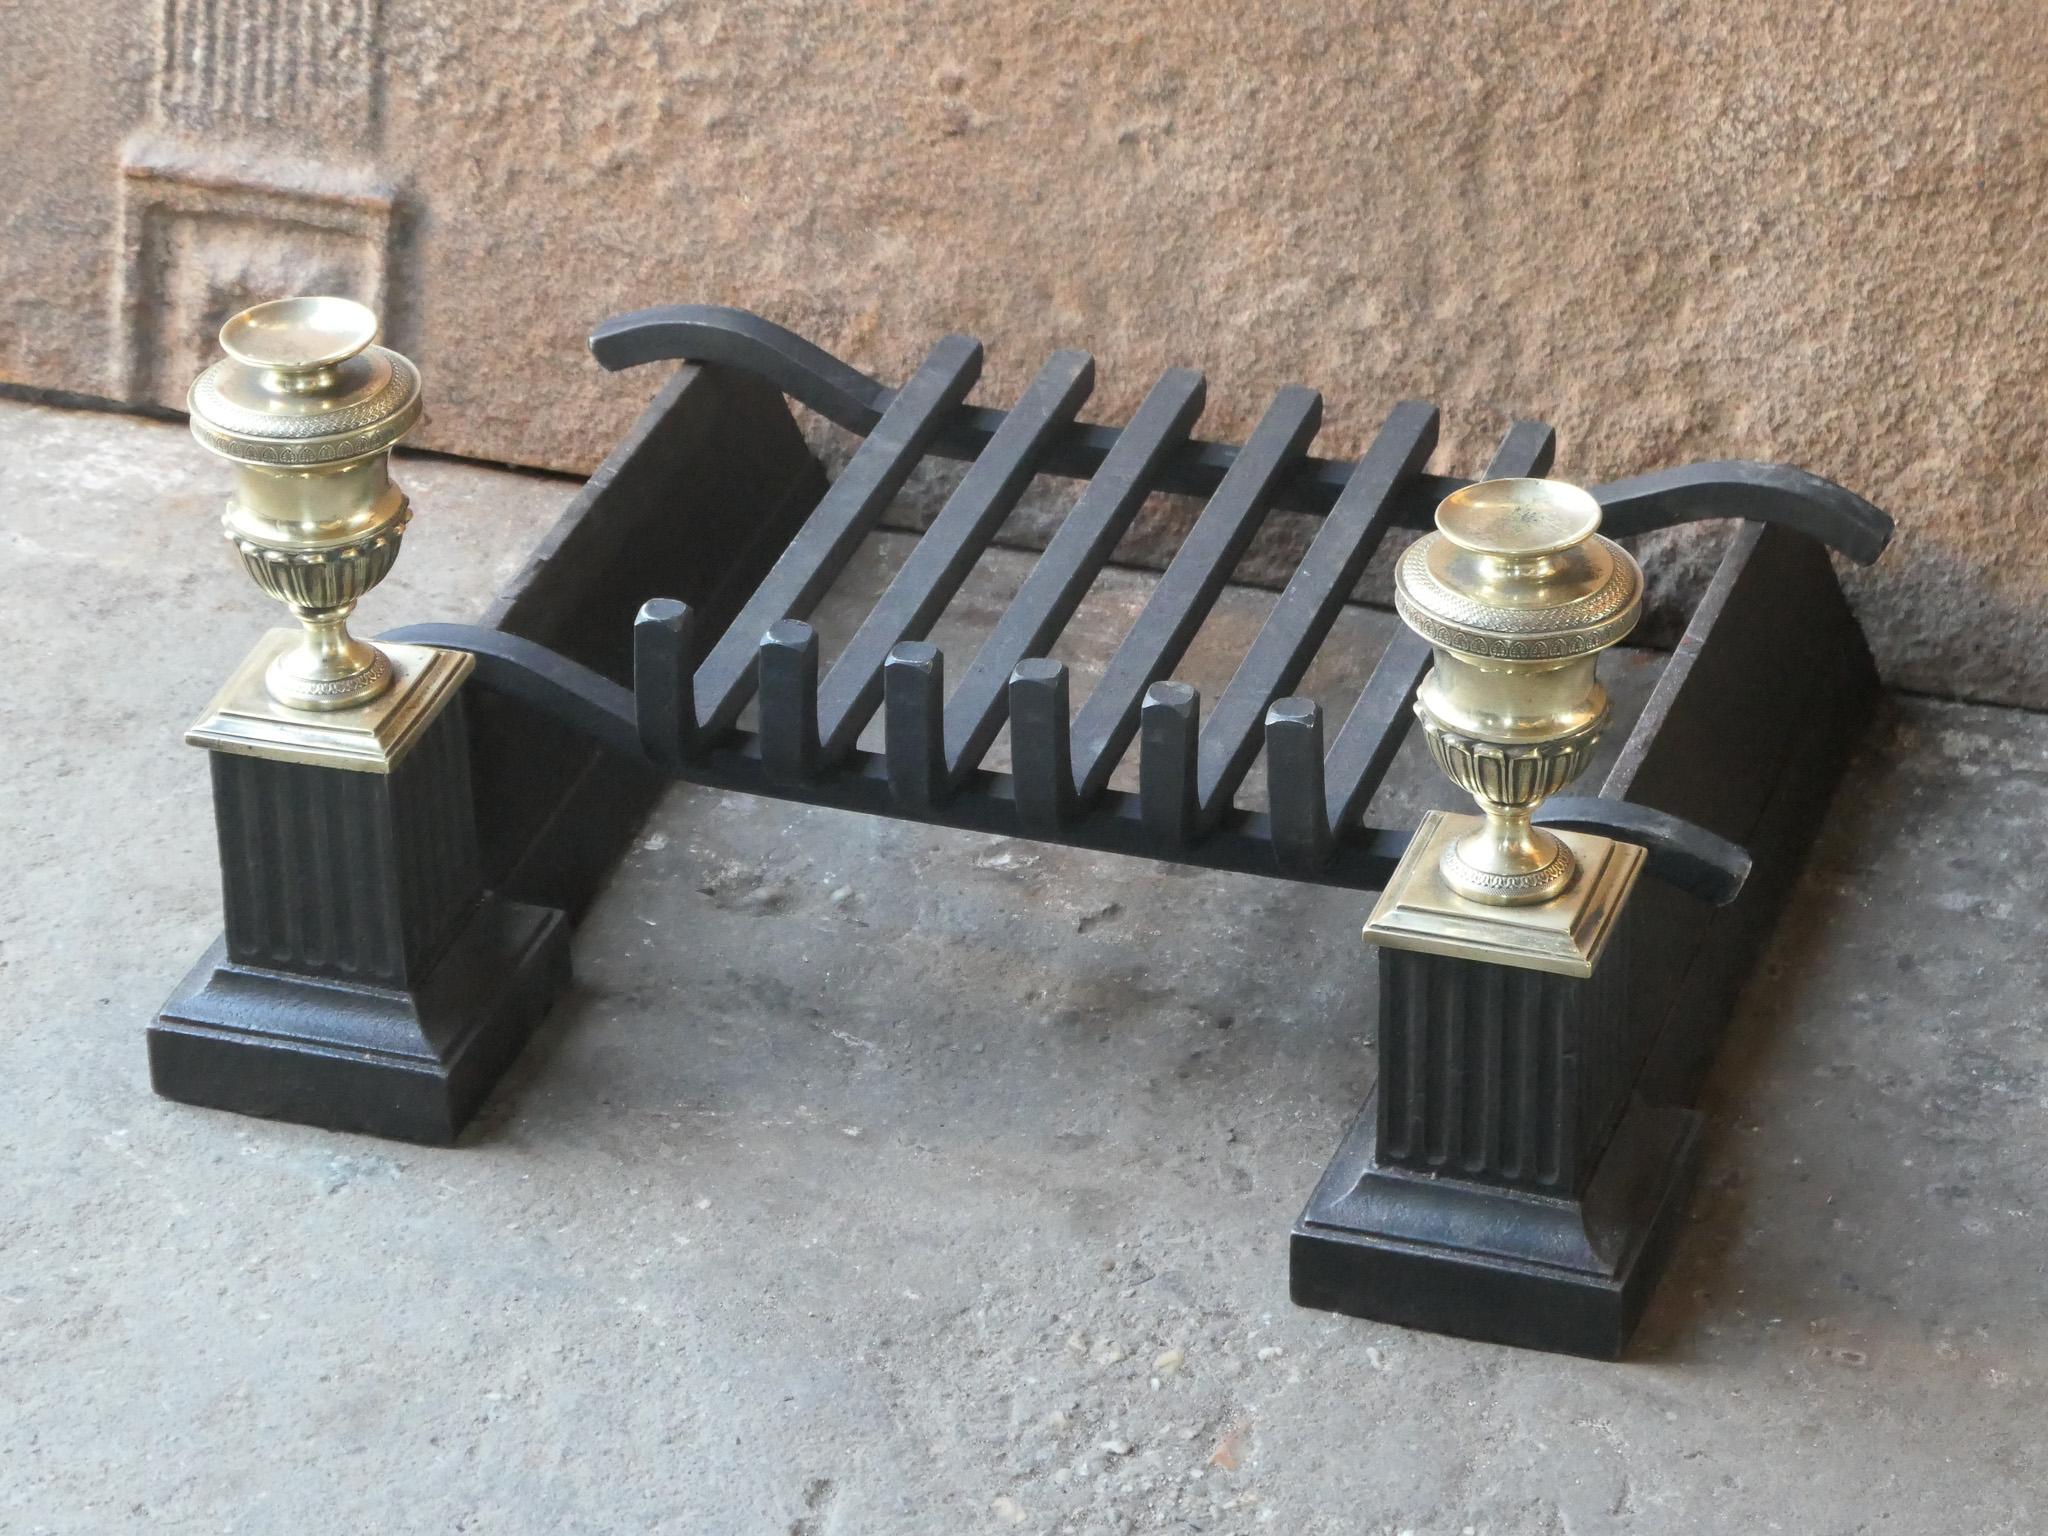 Antique French Napoleon III Fire Grate, Fireplace Grate, 19th Century For Sale 3